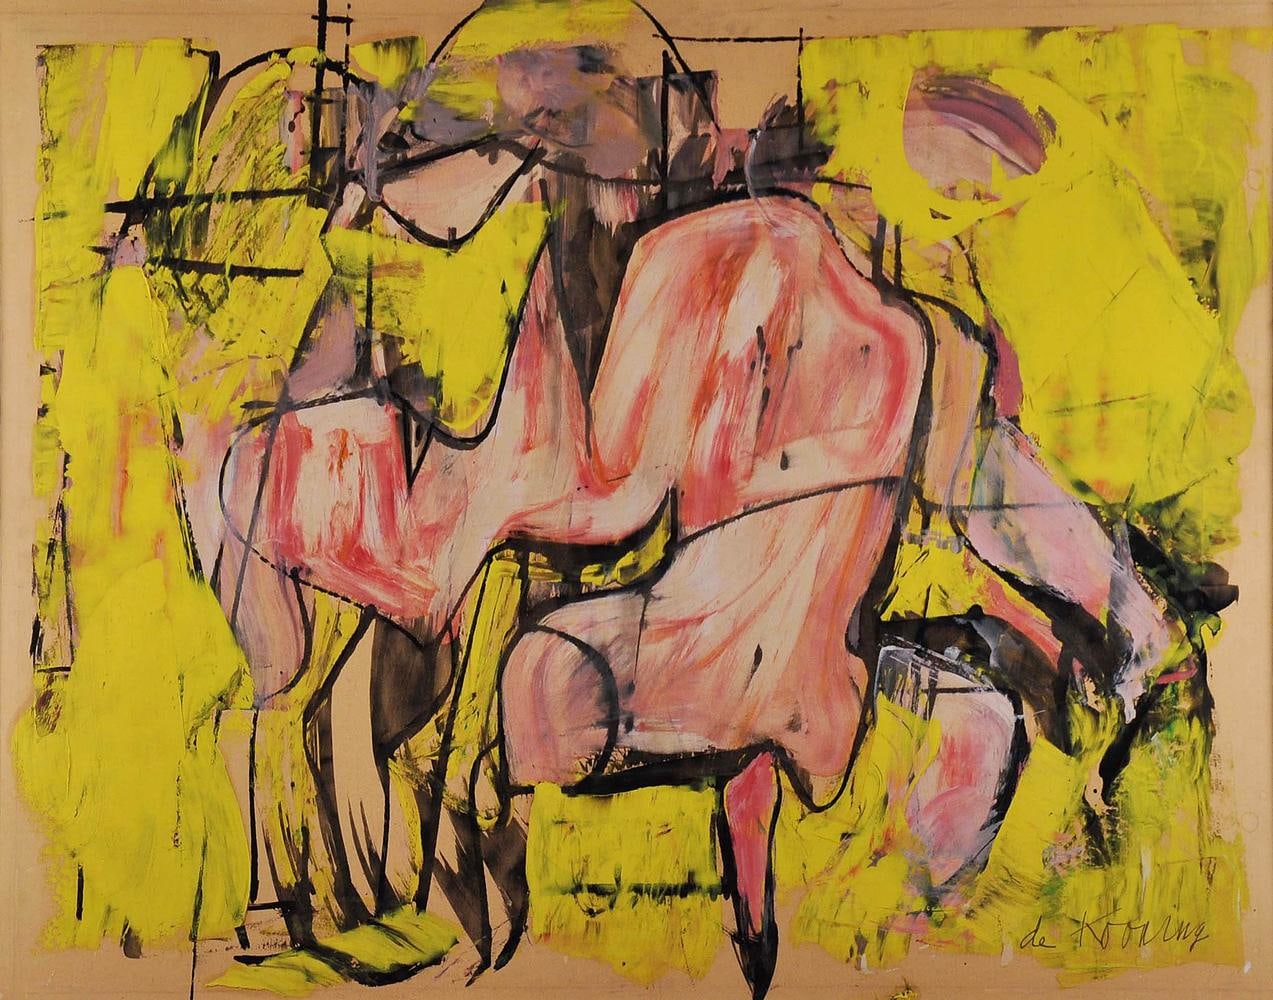 Willem de Kooning

Red Torso

circa 1948-49

oil on paper

18 x 23 1/4 inches (45.7 x 59.1 cm)

Private Collection, Courtesy of Michael N. Altman Fine Art &amp;amp; Advisory Services, LLC&amp;nbsp;